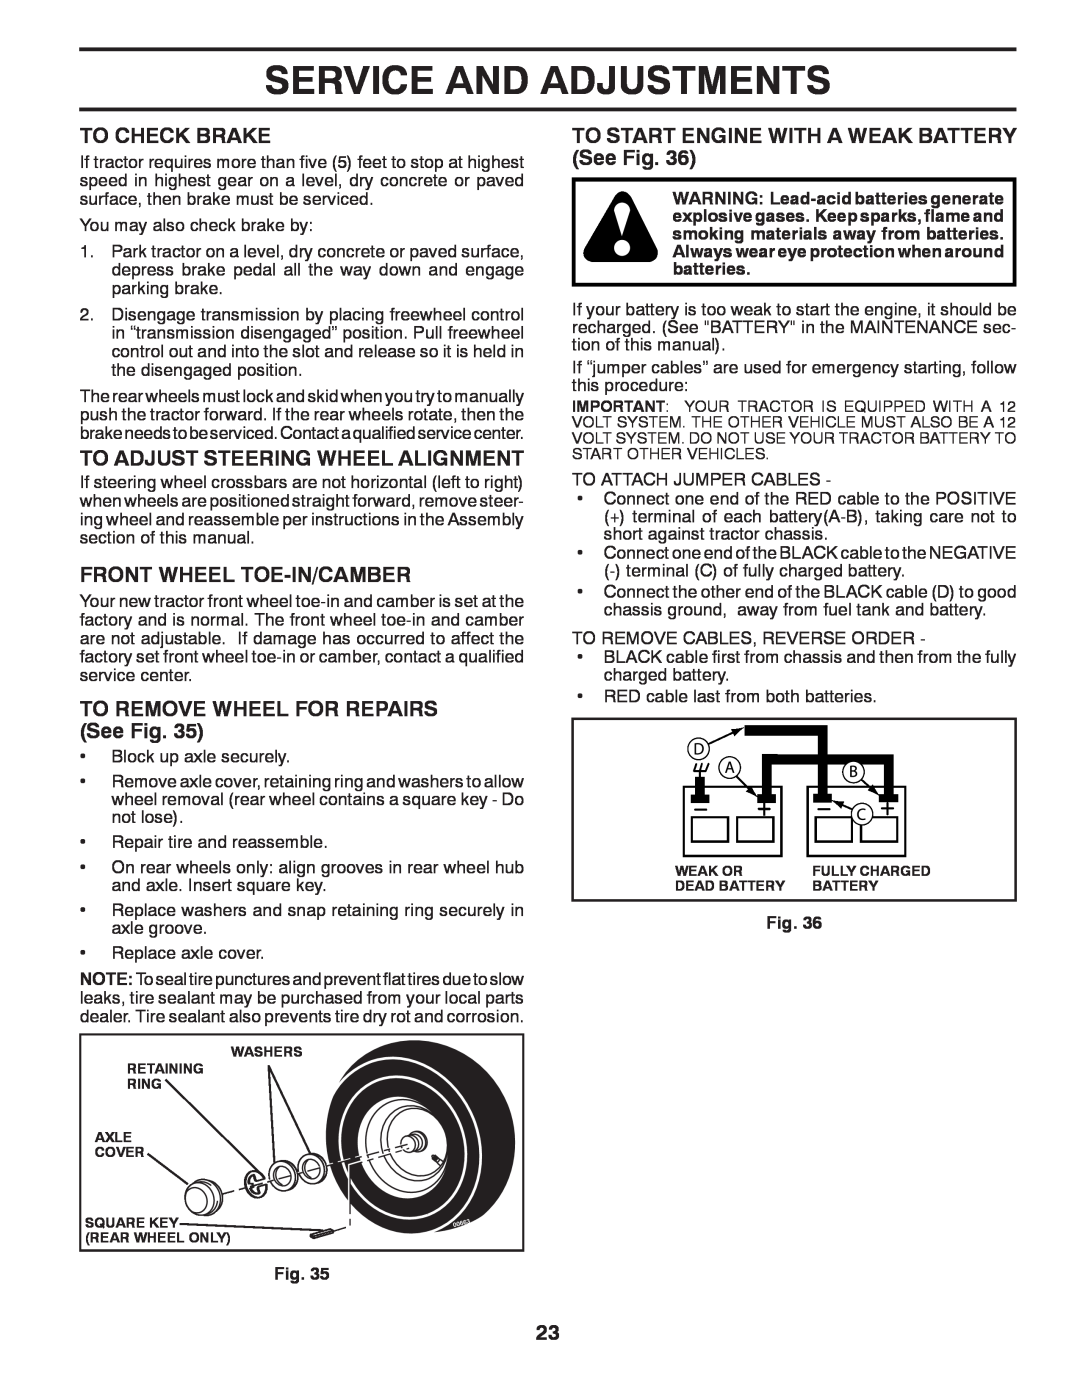 Poulan 433413 manual To Check Brake, To Adjust Steering Wheel Alignment, Front Wheel Toe-In/Camber, Service And Adjustments 